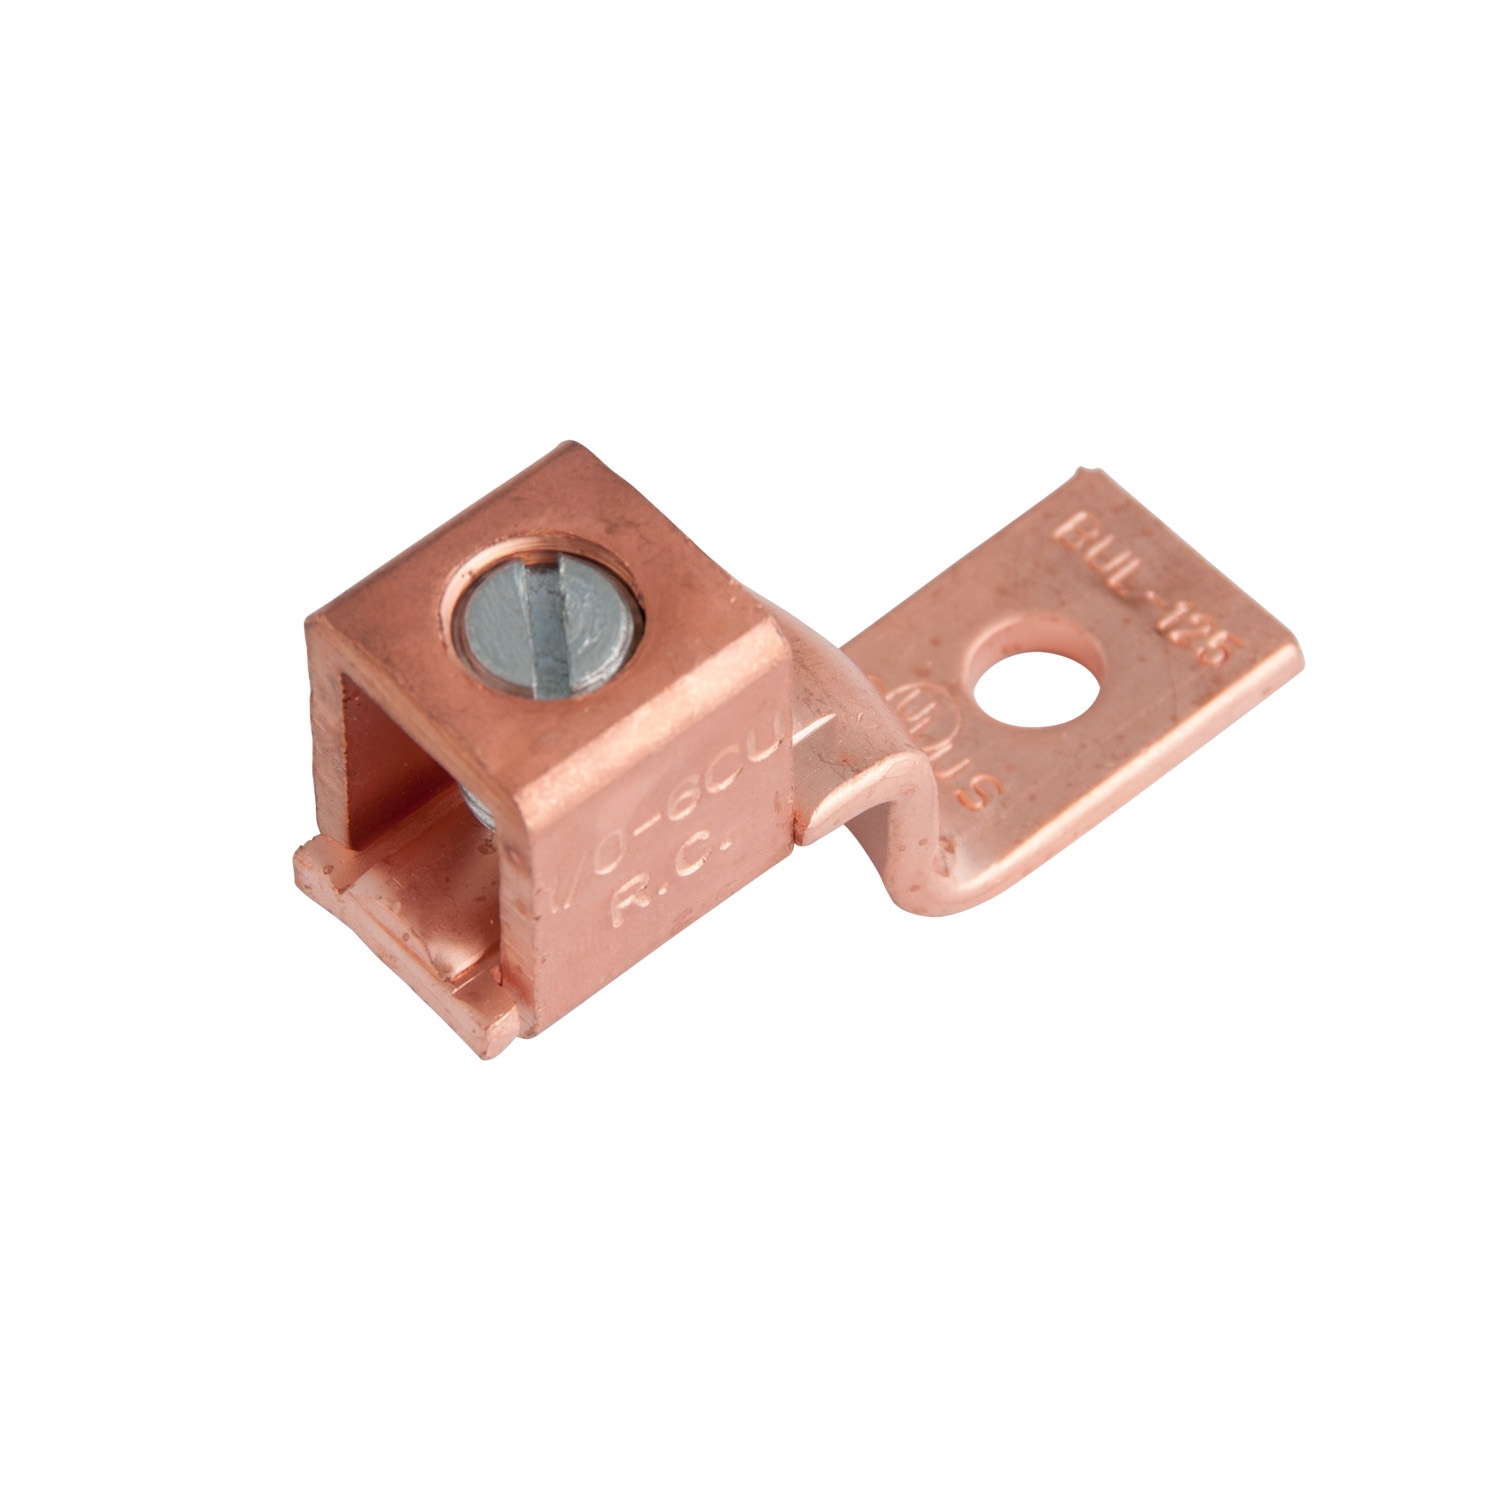 GSLU-125 Mechanical Lug, 600 V, 6 to 0 Wire, 3/8 in Stud, Copper Contact